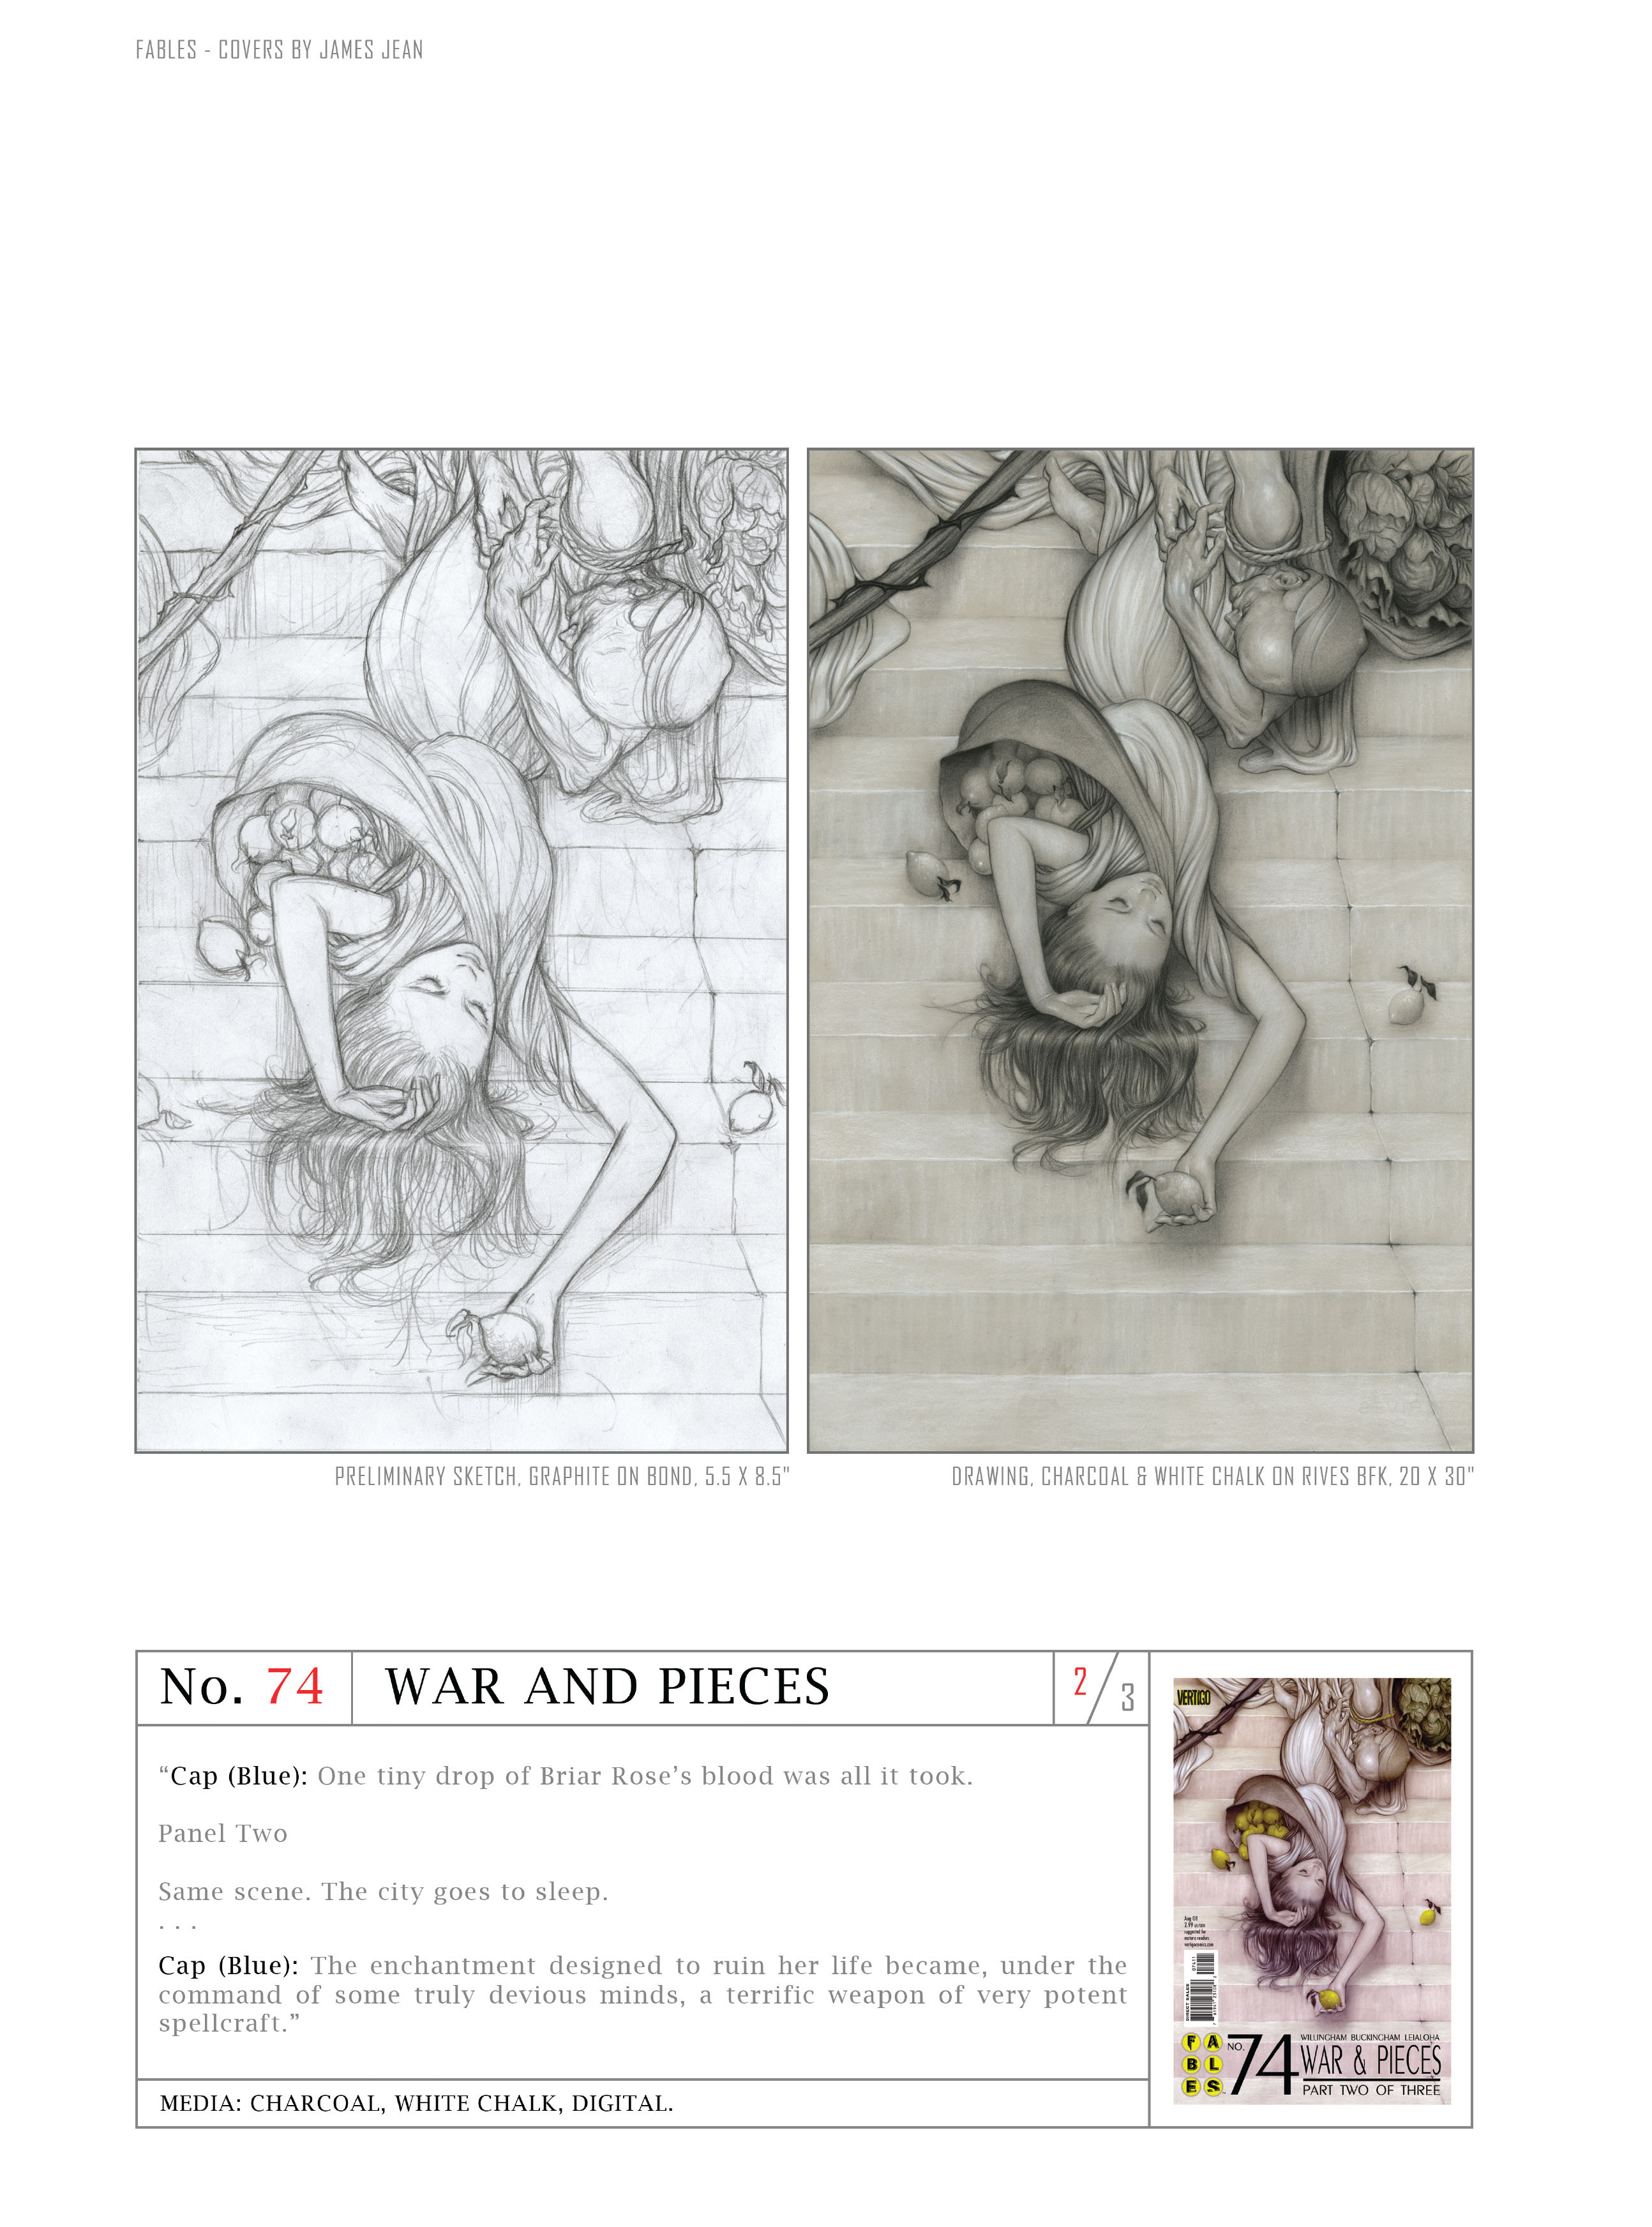 Read online Fables: Covers by James Jean comic -  Issue # TPB (Part 2) - 84